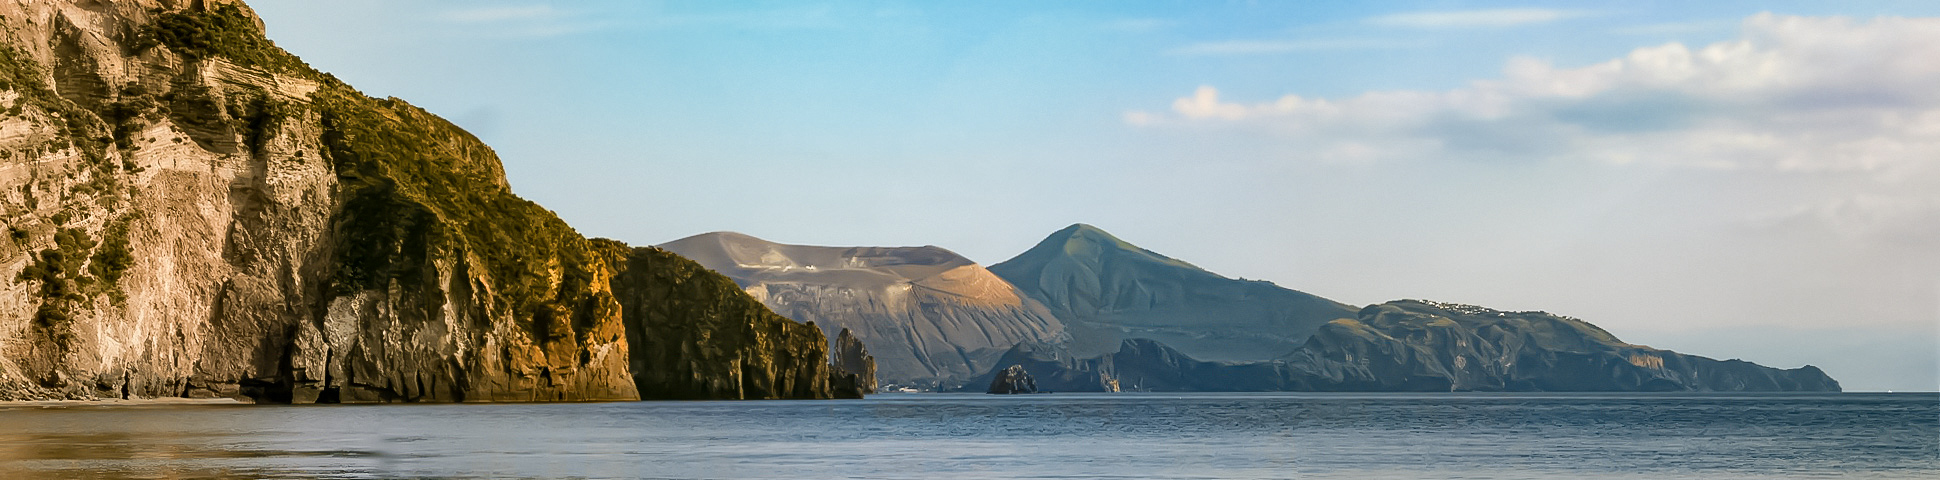 Panoramic view from Sailing and Hiking in the Aeolian Islands